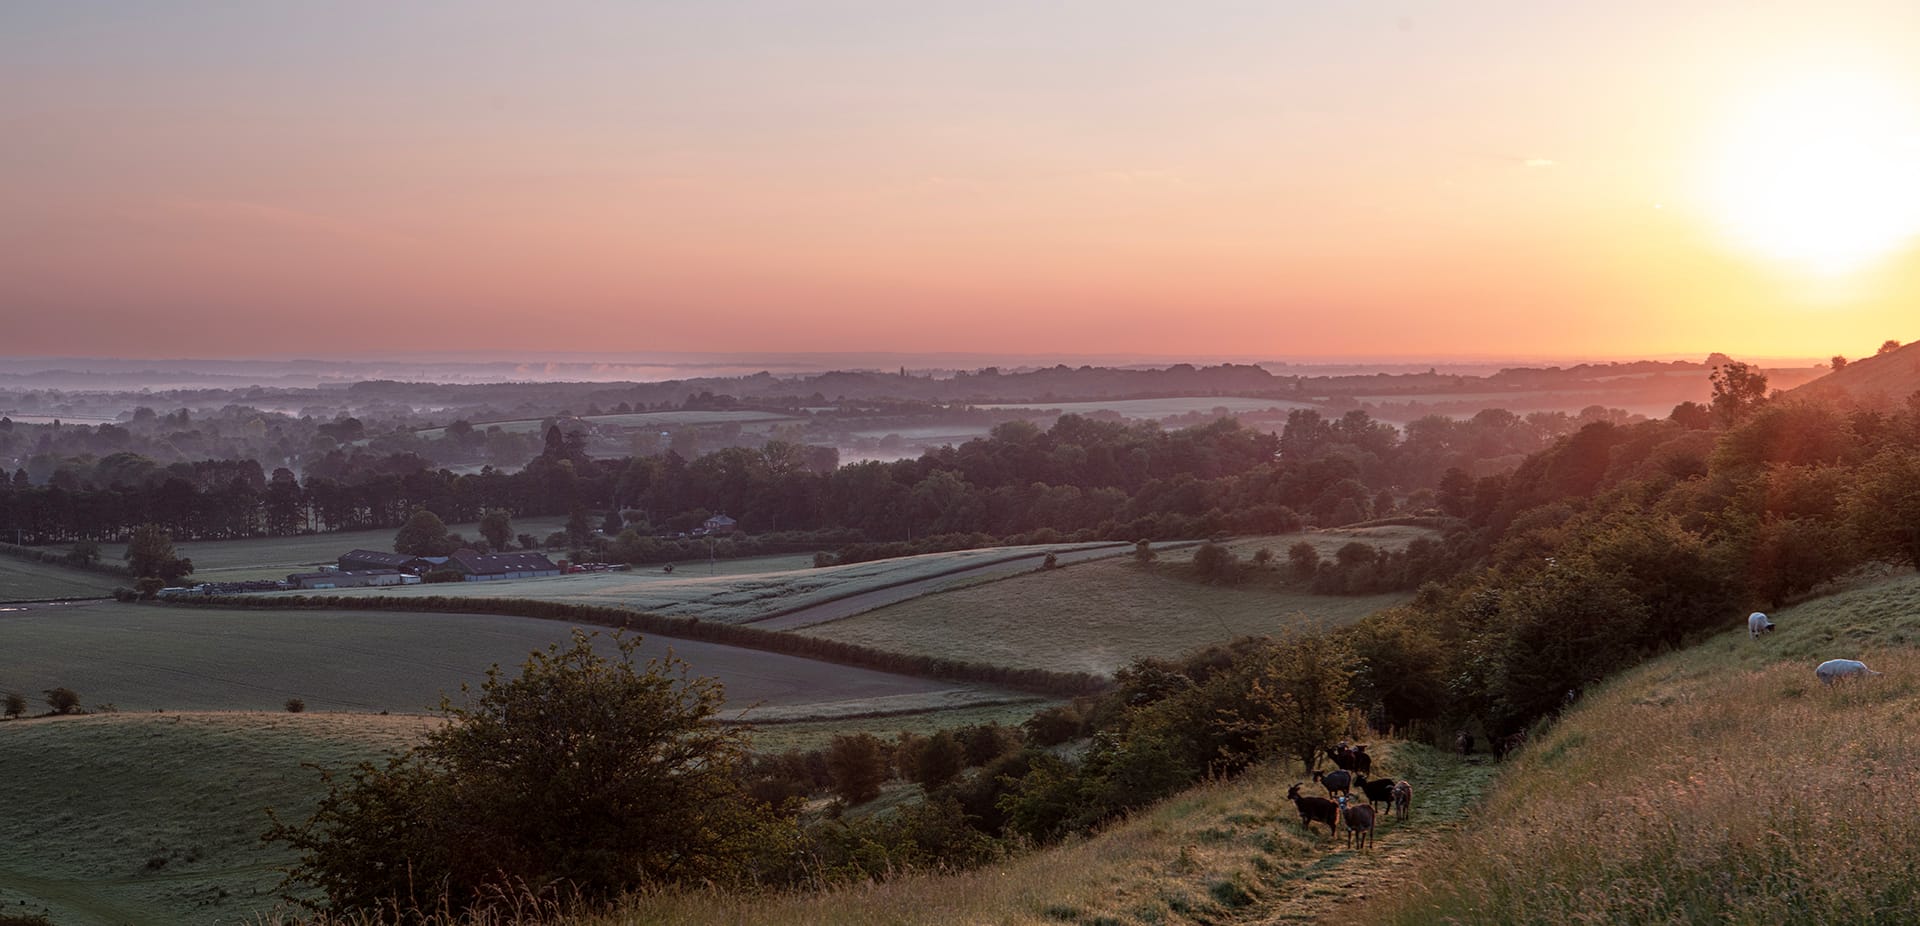 Capturing the Beauty of UK Landscape Photography: See my Free Top 5 Tips